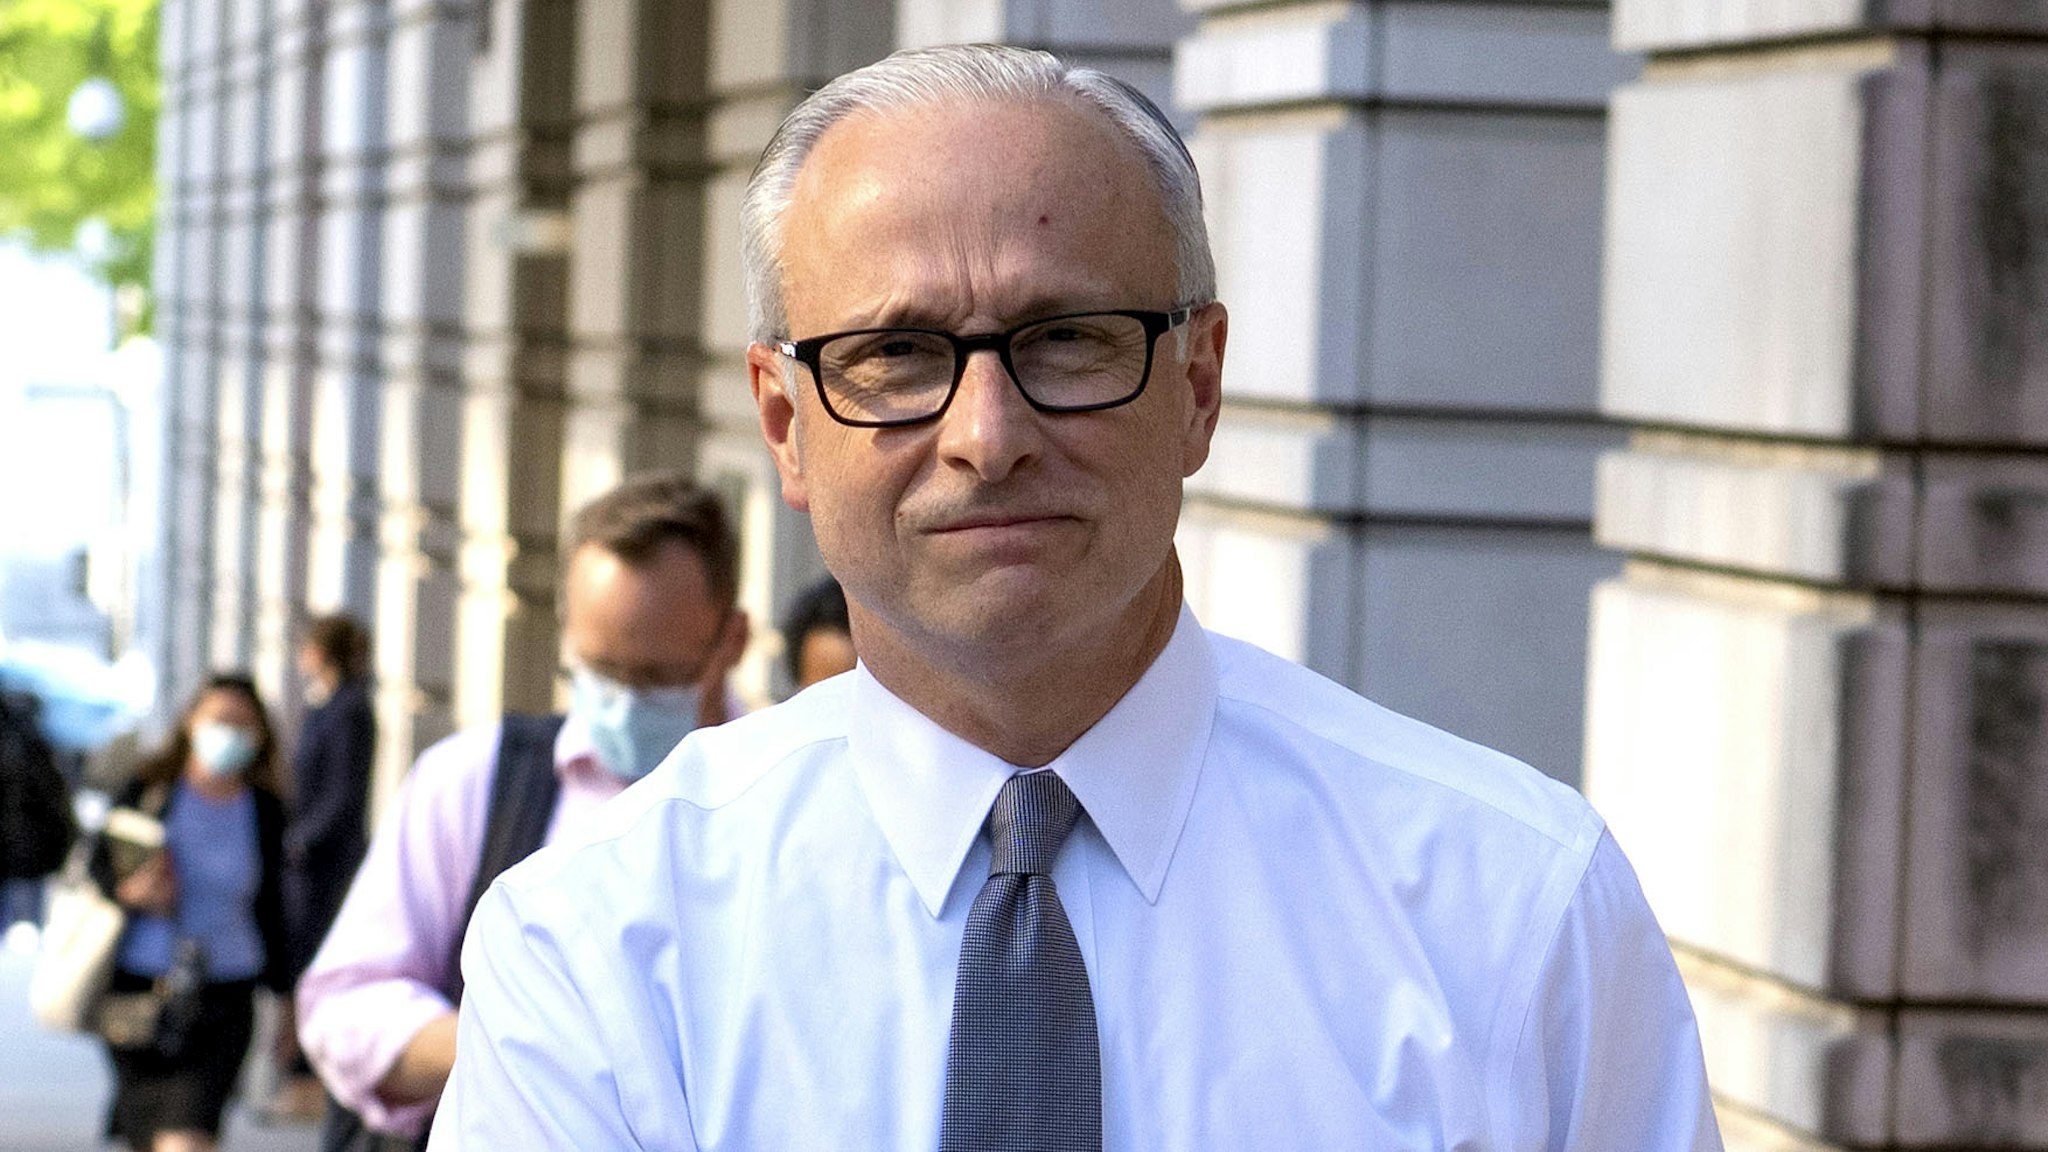 WASHINGTON, DC - MAY 19: (NY &amp; NJ NEWSPAPERS OUT) Former FBI general counsel James A. Baker departs United States District Court for the District of Columbia following a full day of giving testimony on May 19, 2022 in Washington, DC.